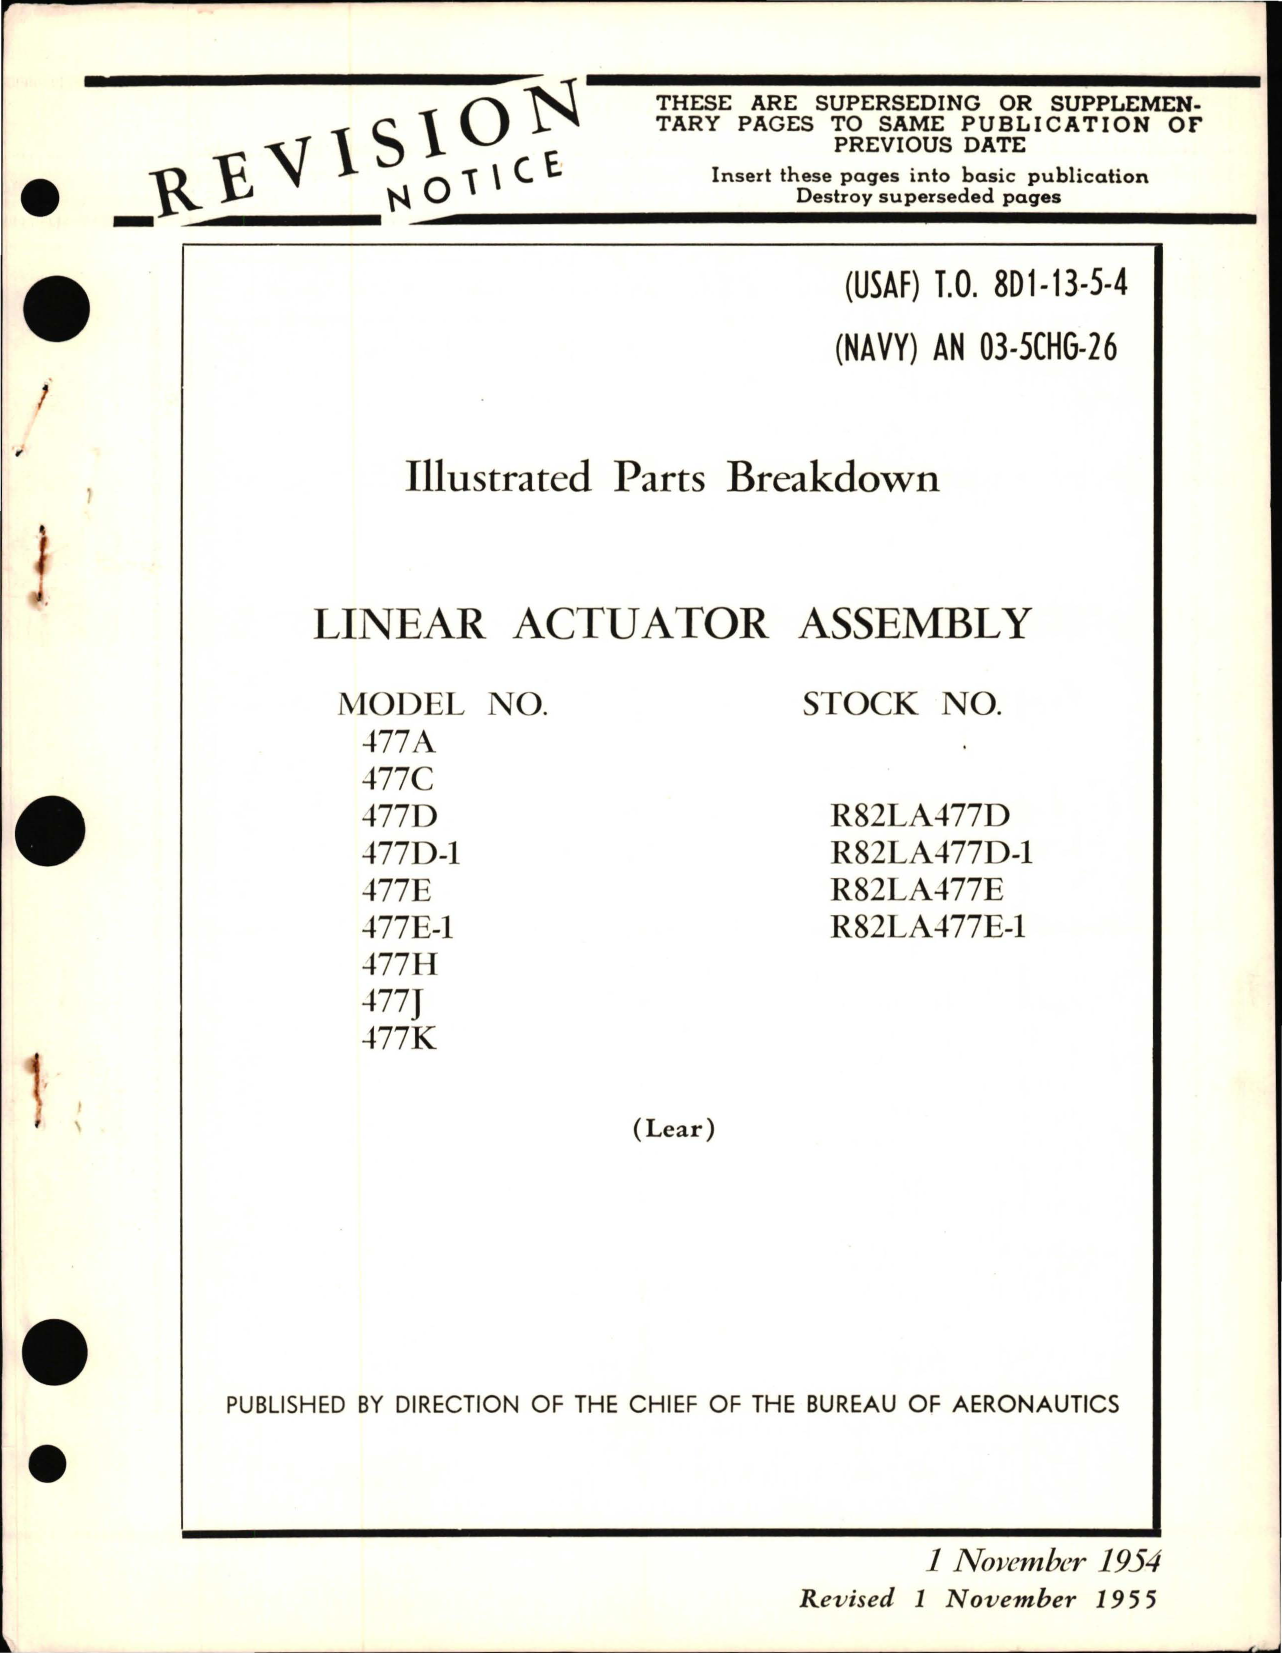 Sample page 1 from AirCorps Library document: Illustrated Parts Breakdown for Linear Actuator Assembly Models 477 